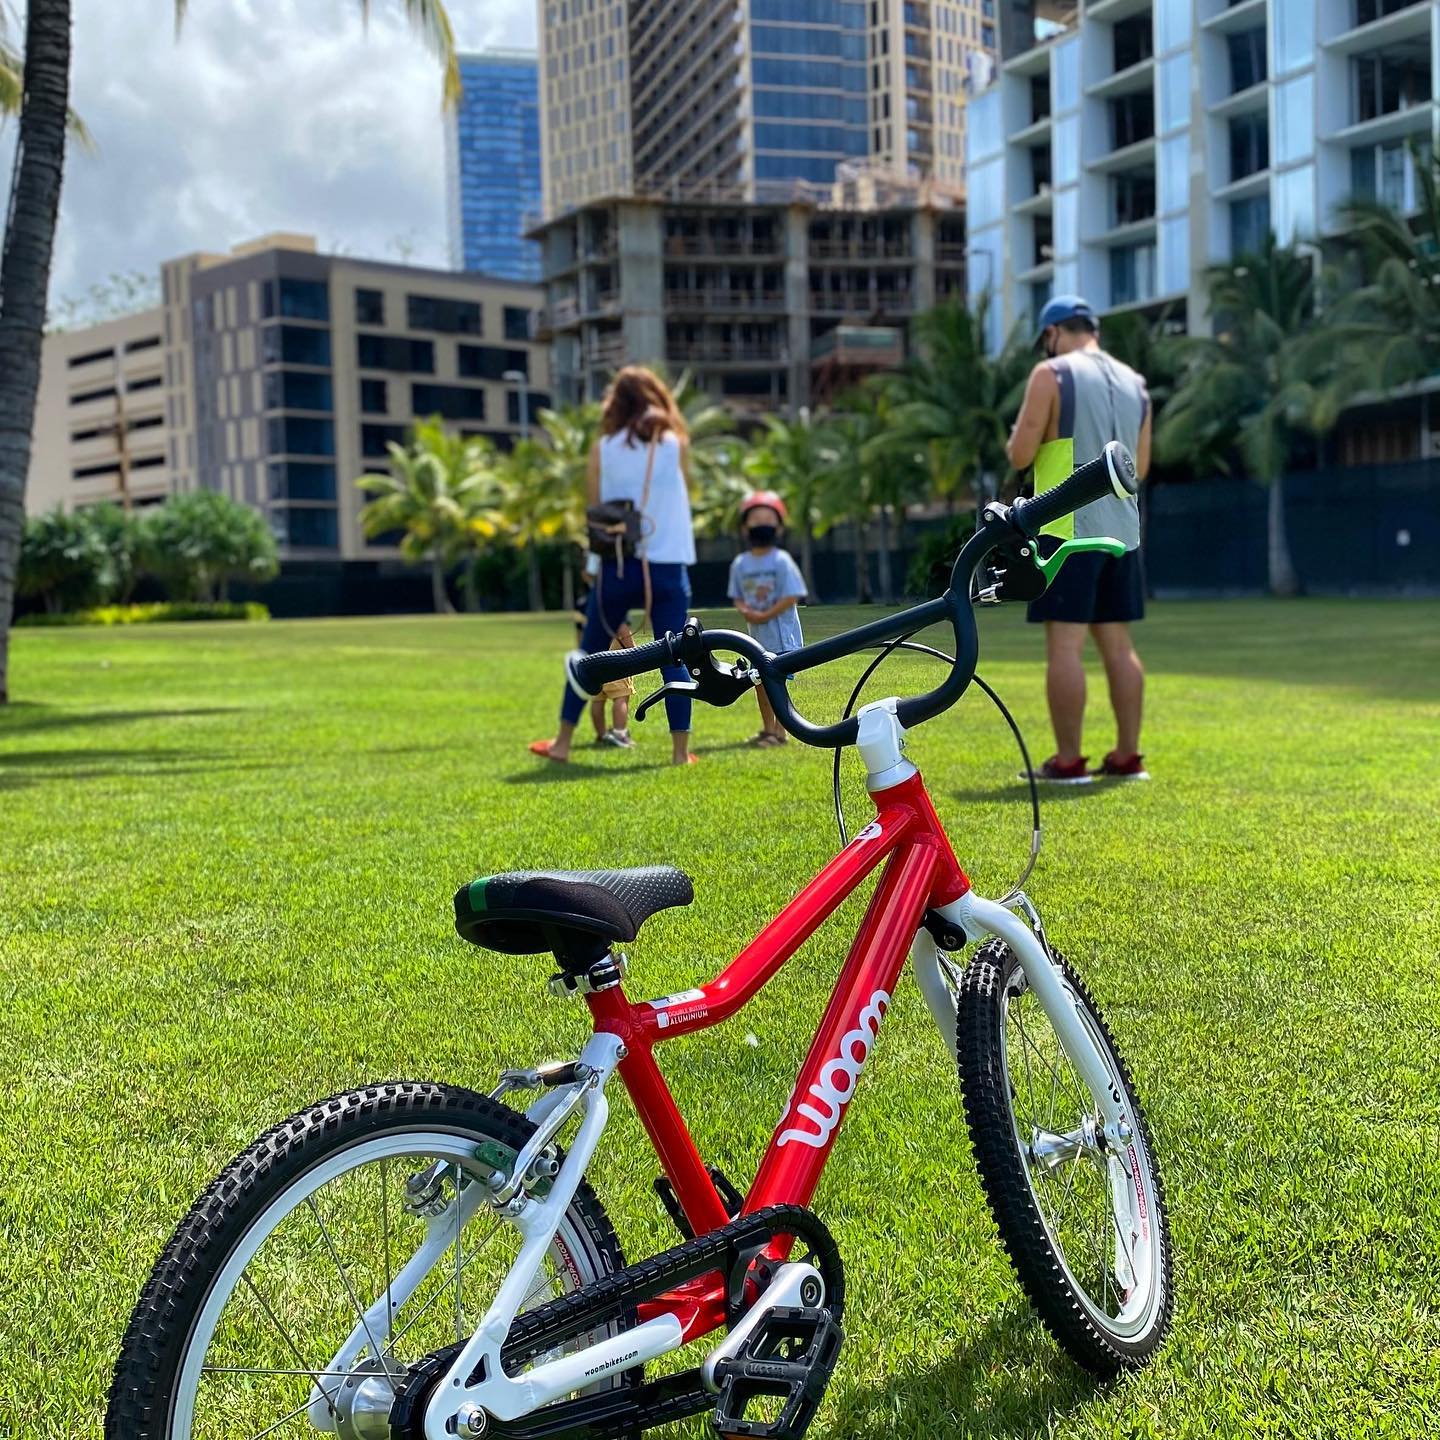 At this week’s bike clinic, @hblridealoha is focused on helmet safety, while @bocahawaii is talking all about brakes—how to use and how to properly adjust them. Grab a free map for a listing of the best places to bike on Oahu while supplies last. Plus, you can learn all about the #SafeUs 3-Feet Ride, a ride dedicated to educating drivers on this important 3 feet of distance law keeping bicyclists safe on our roads. Join us on Sunday from 9-11am at Victoria Ward Park!